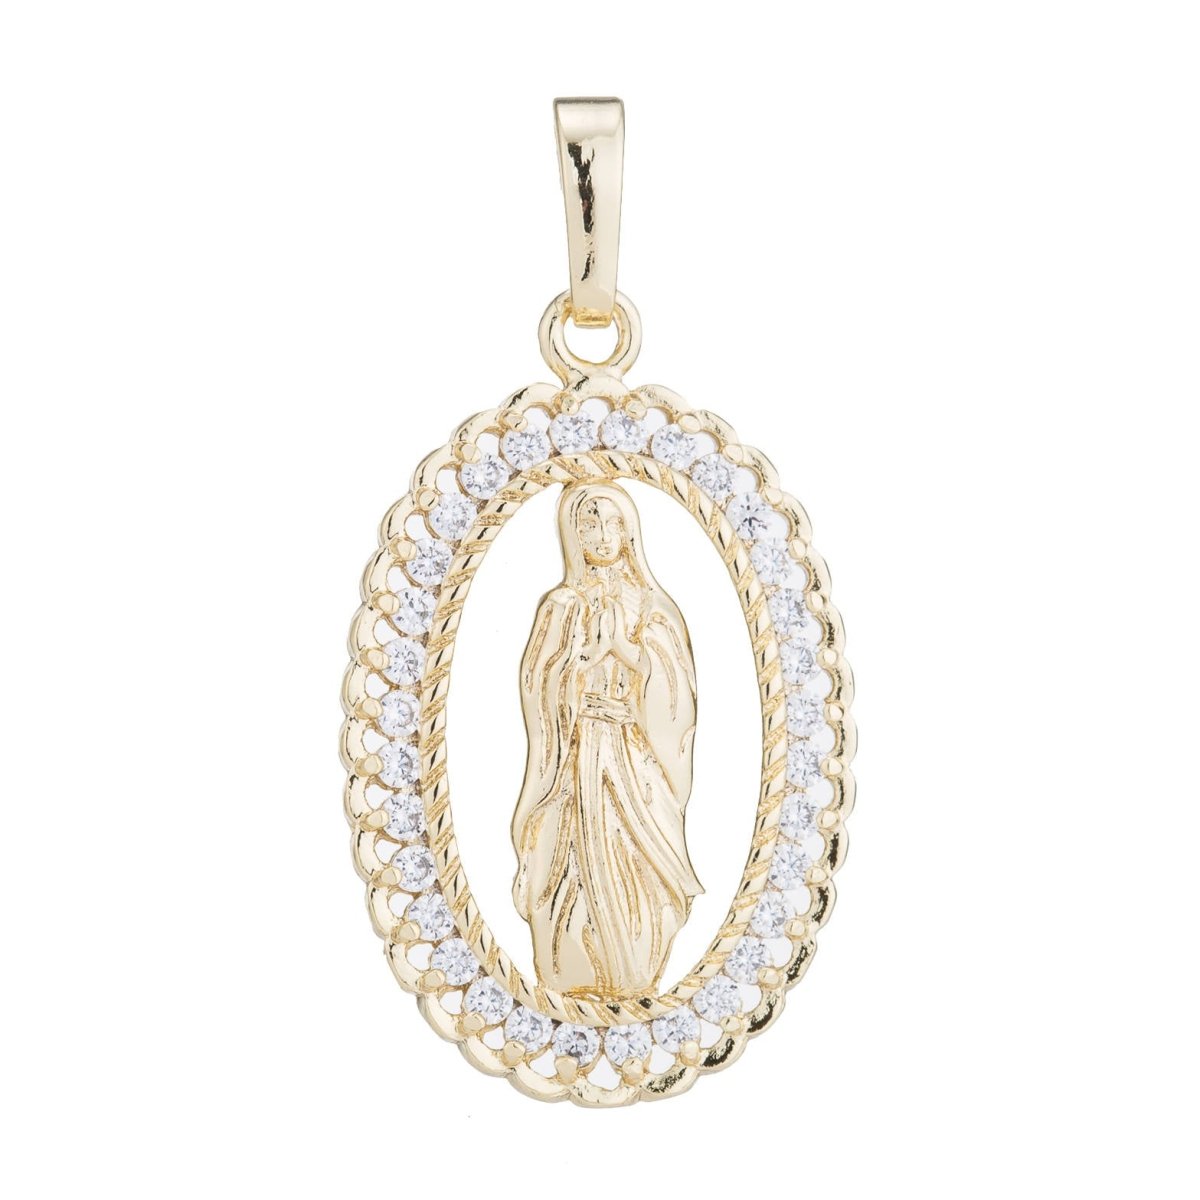 Holy Mother Virgin Mary Pray For Us Gold Filled Necklace, Vintage Design Pendant Cubic Zirconia, Religious Catholic Findings Jewelry H-183 I-755 - DLUXCA